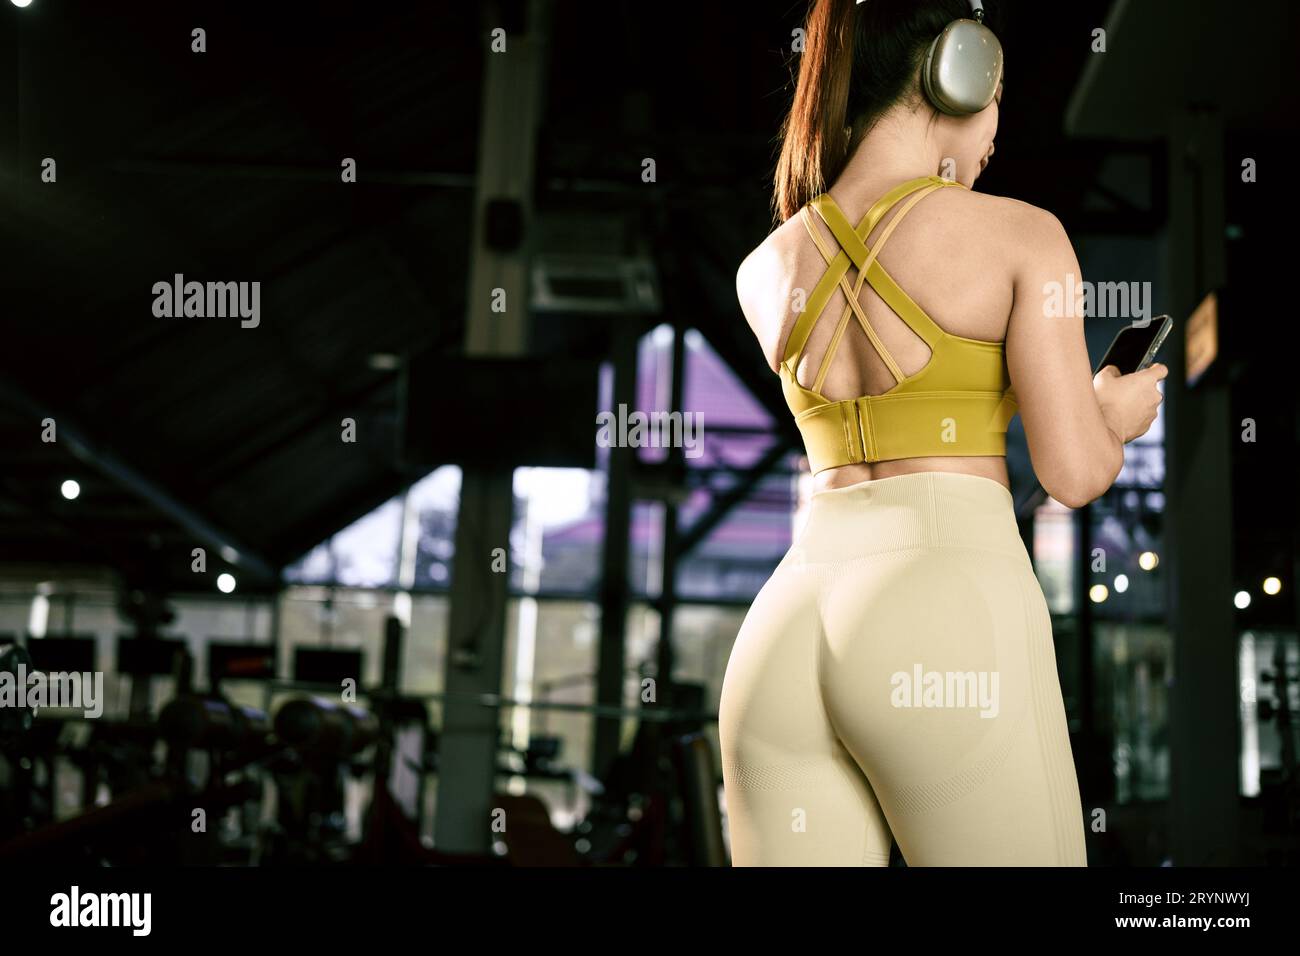 Young asian woman wearing headphones listening to music from her smart phone. Female fitness model in gym using mobile phone. Stock Photo